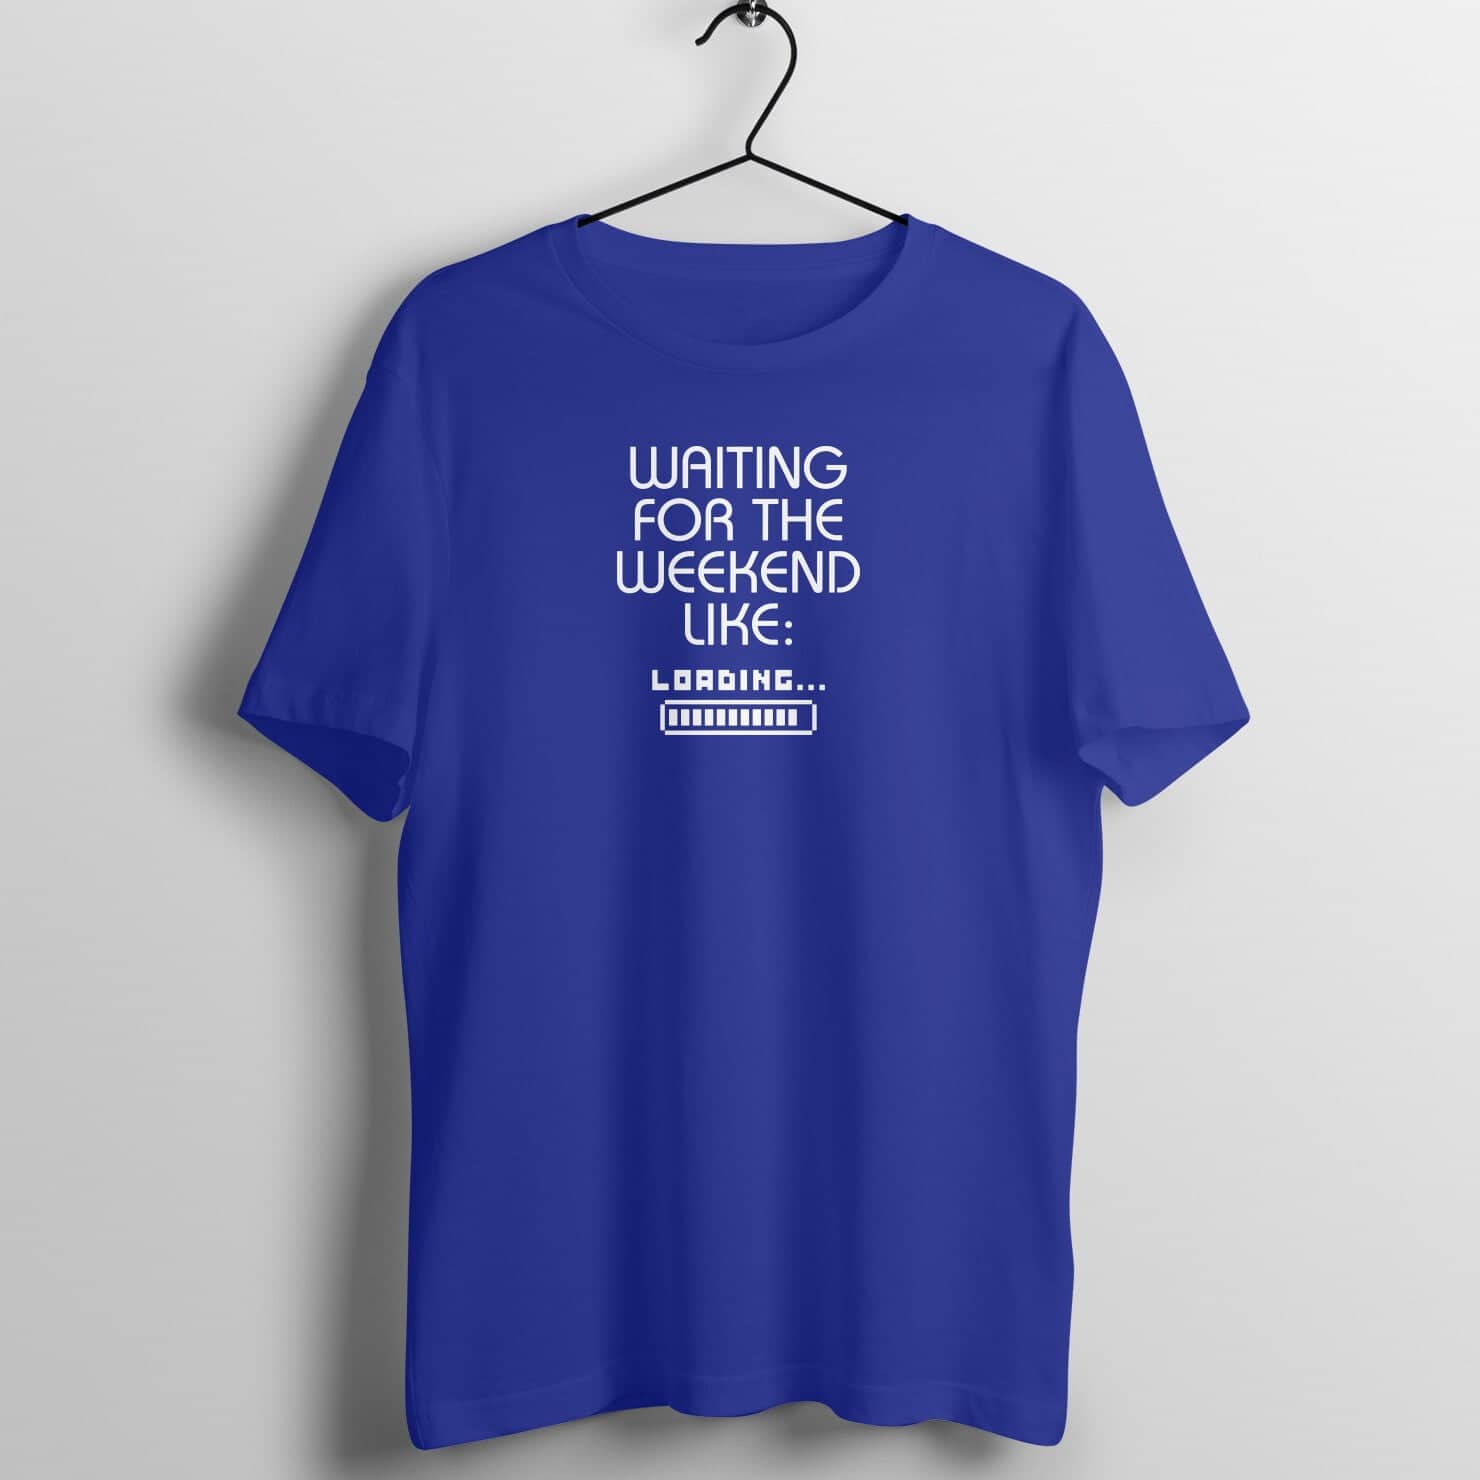 Waiting for the Weekend Like Funny Royal Blue T Shirt for Men and Women Printrove Royal Blue S 